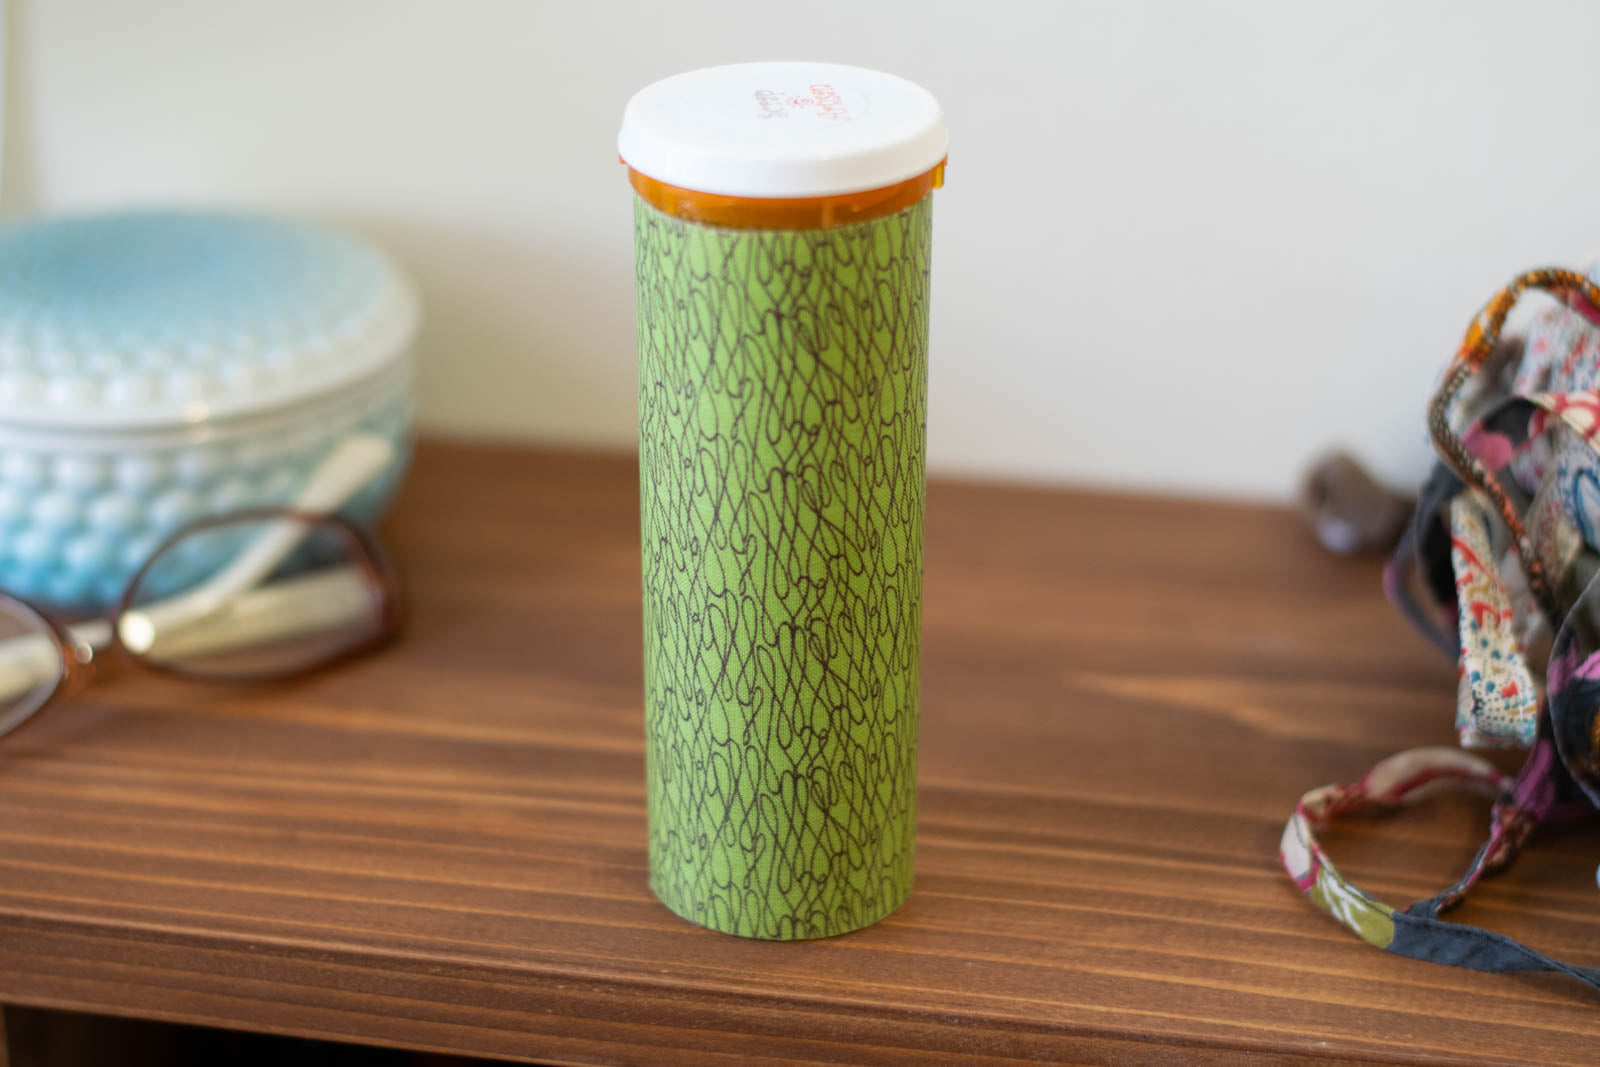 Upcycled Prescription Bottle Sewing Kit — Brown Scribbles on Green, 5.5" high, easy open cap, closed